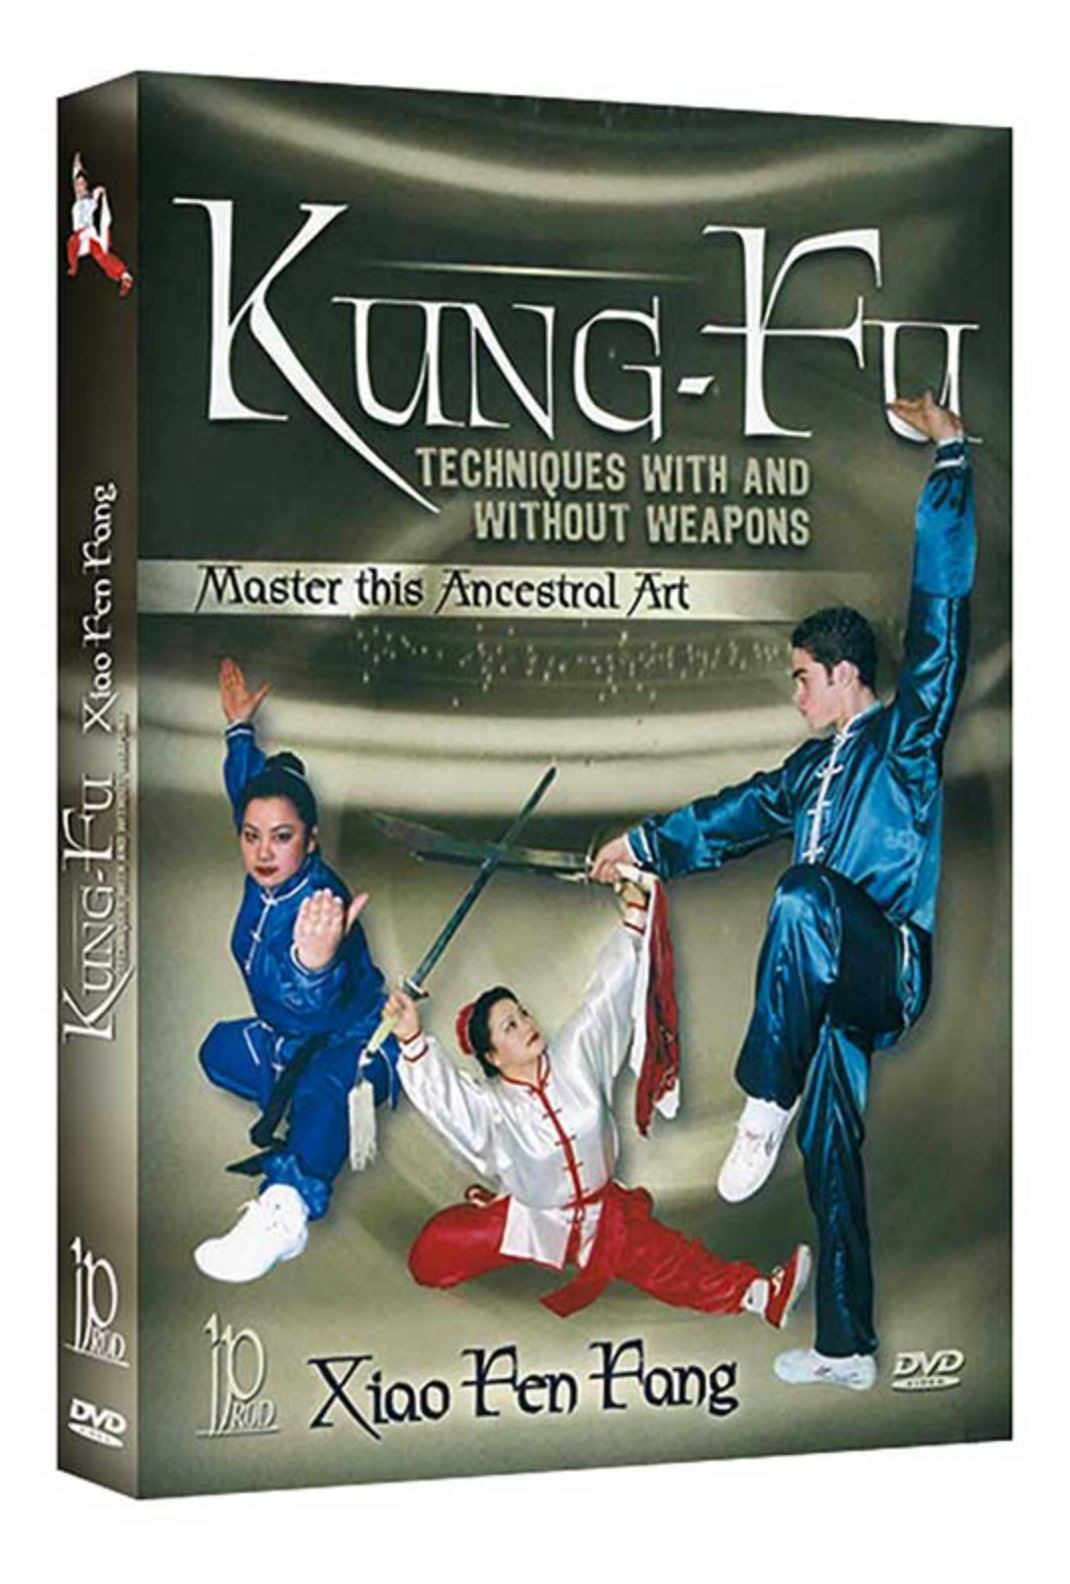 Kung Fu Techniques With & Without Weapons DVD by Fang Xiao Fen